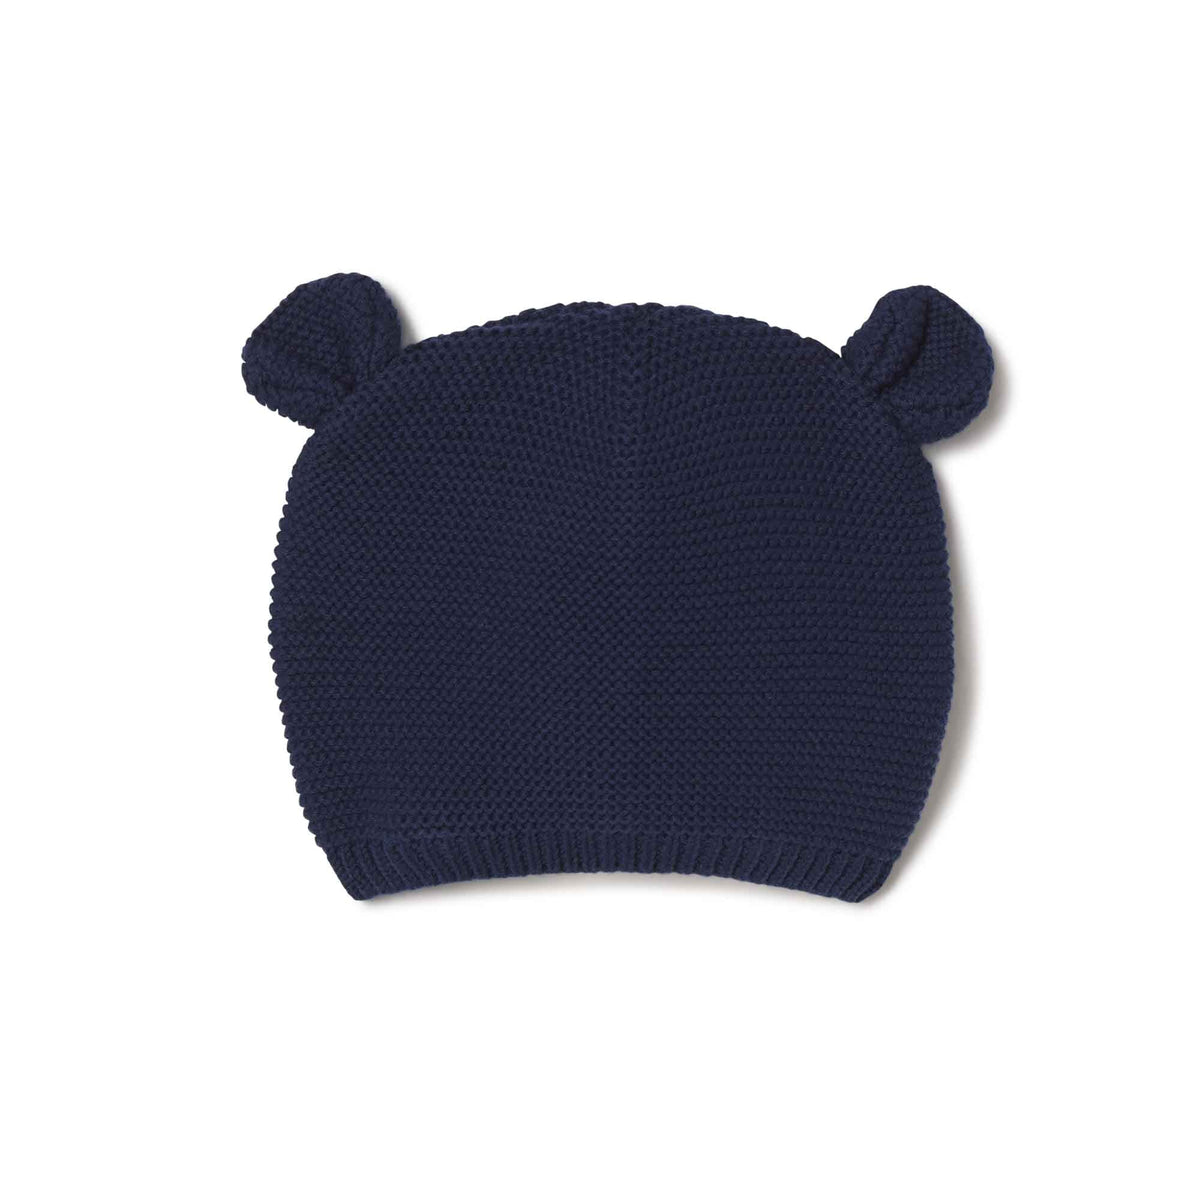 Classic and Preppy Baby Sweater Knit Hat, Medieval Blue - FINAL SALE-Accessory-Medieval Blue-One-Size-CPC - Classic Prep Childrenswear